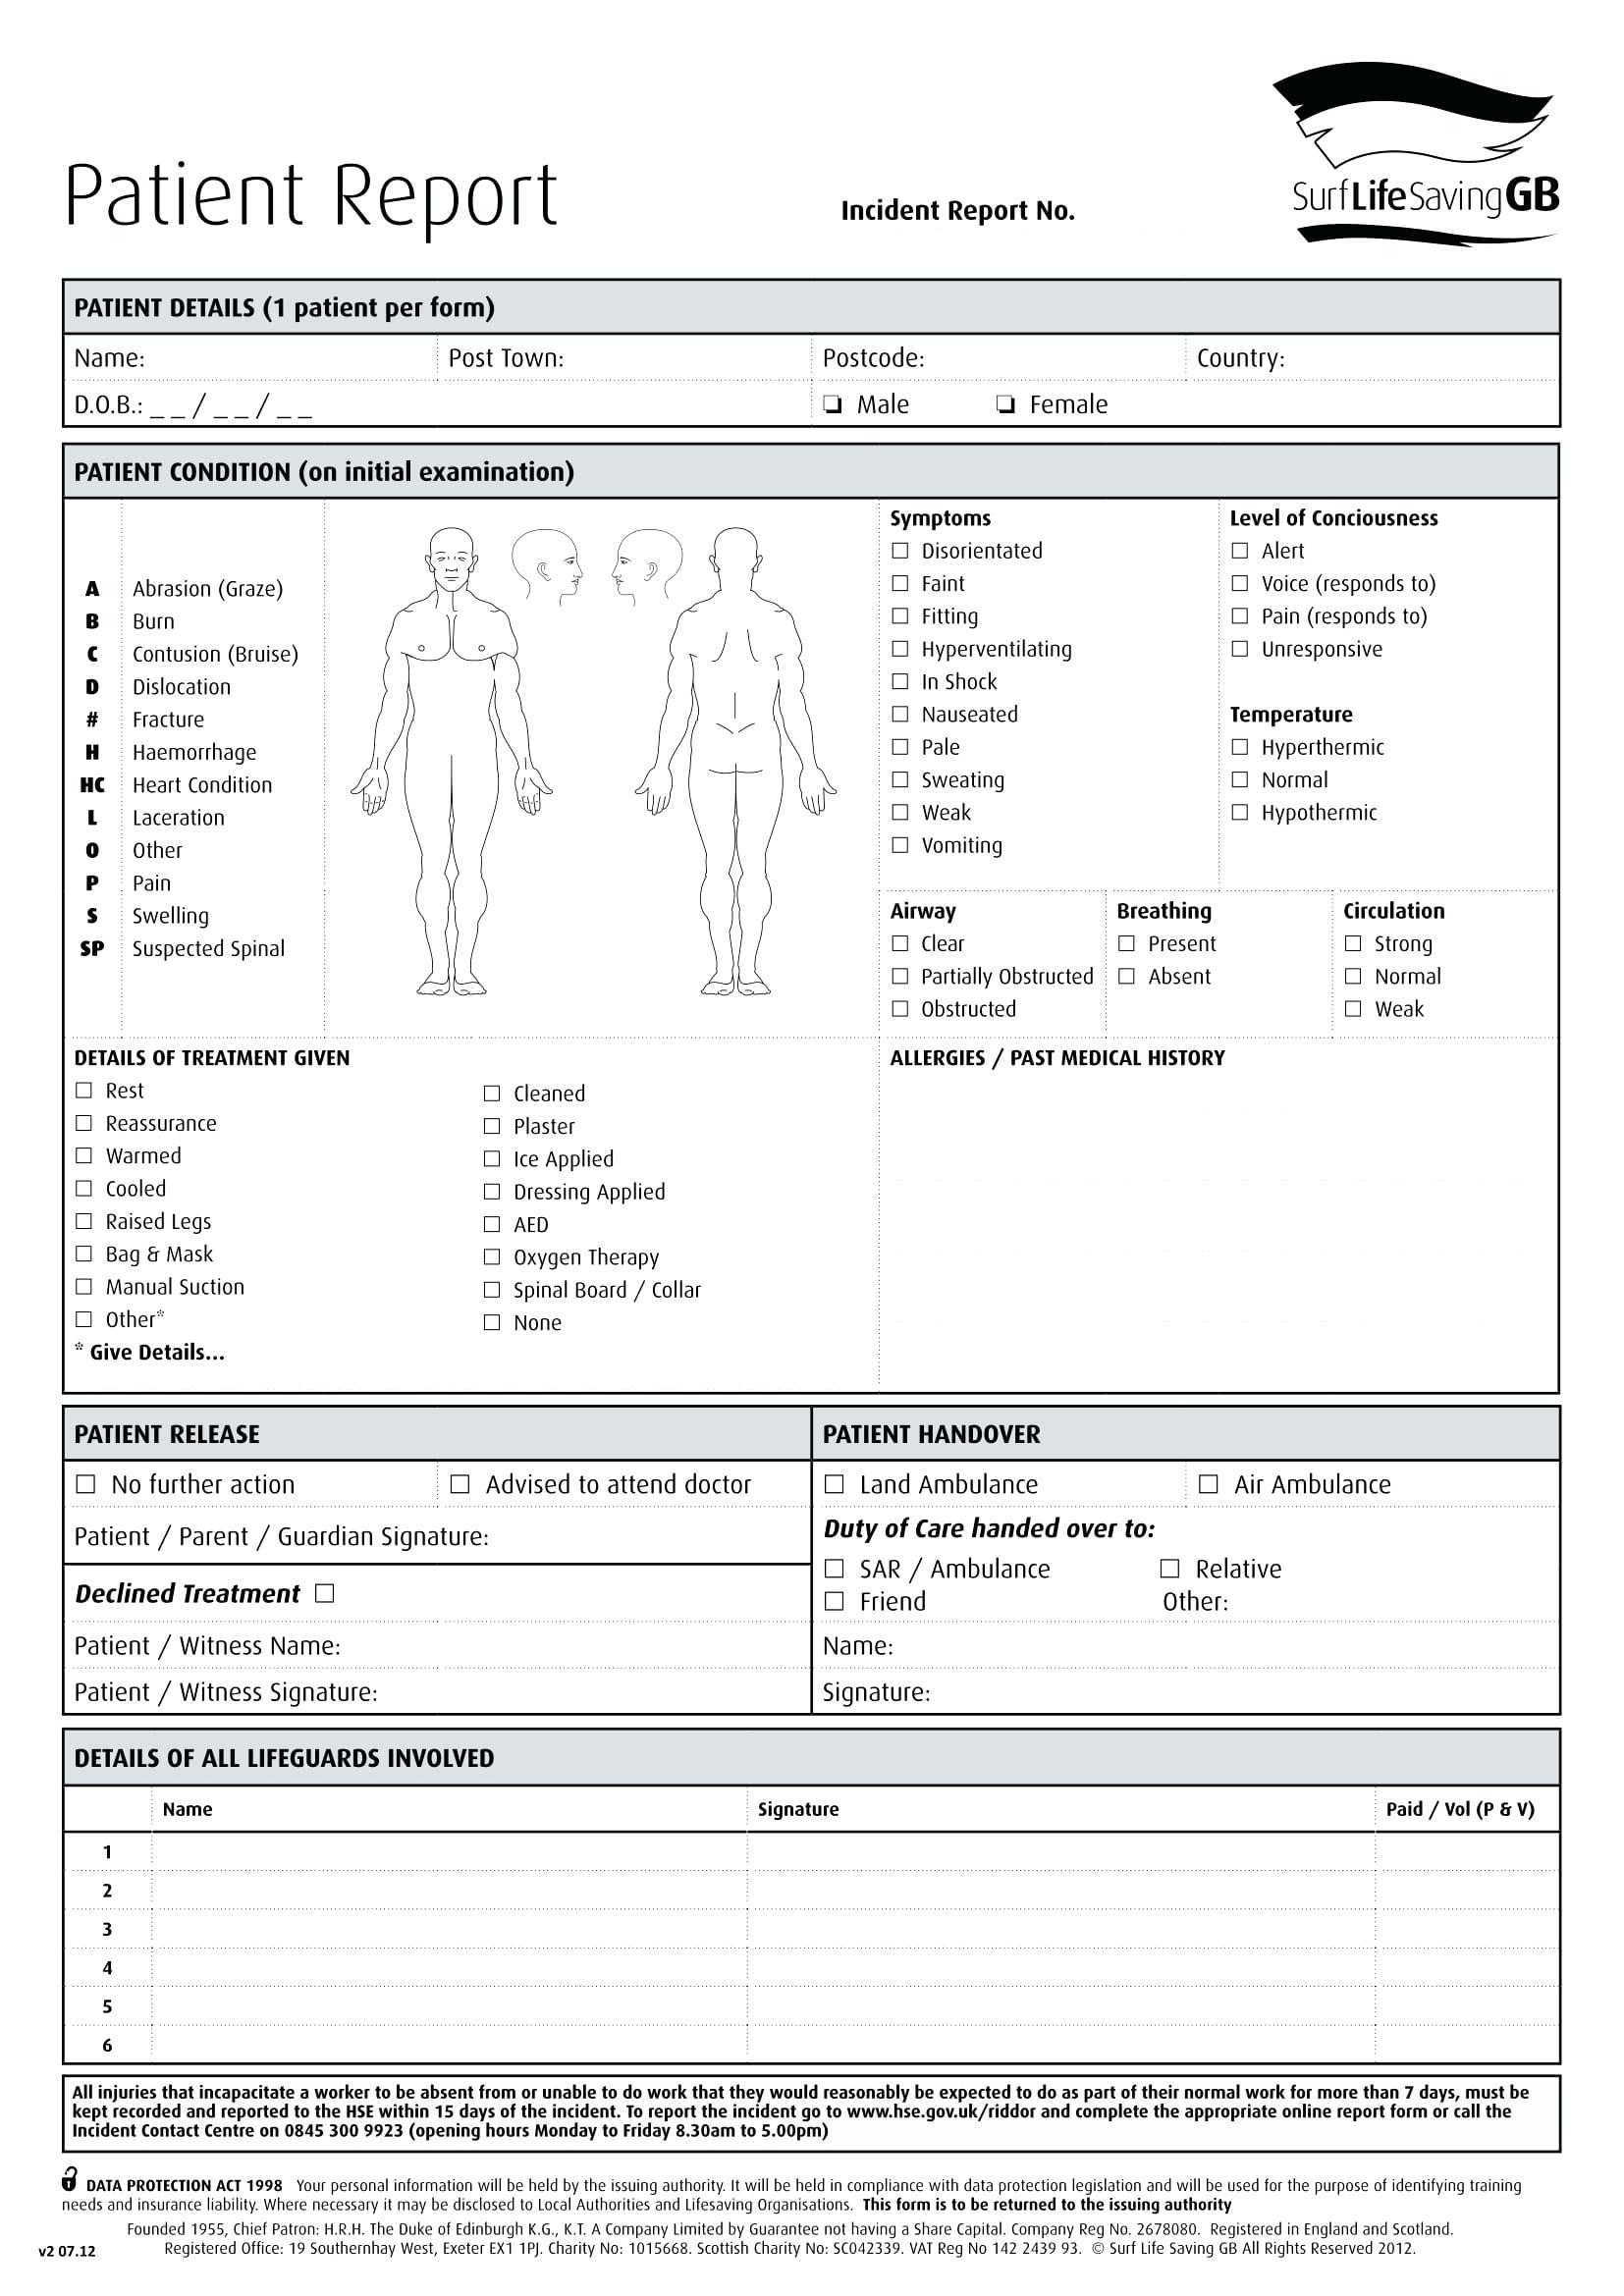 Incident Report Form Template Free Download – Vmarques With Regard To Patient Report Form Template Download